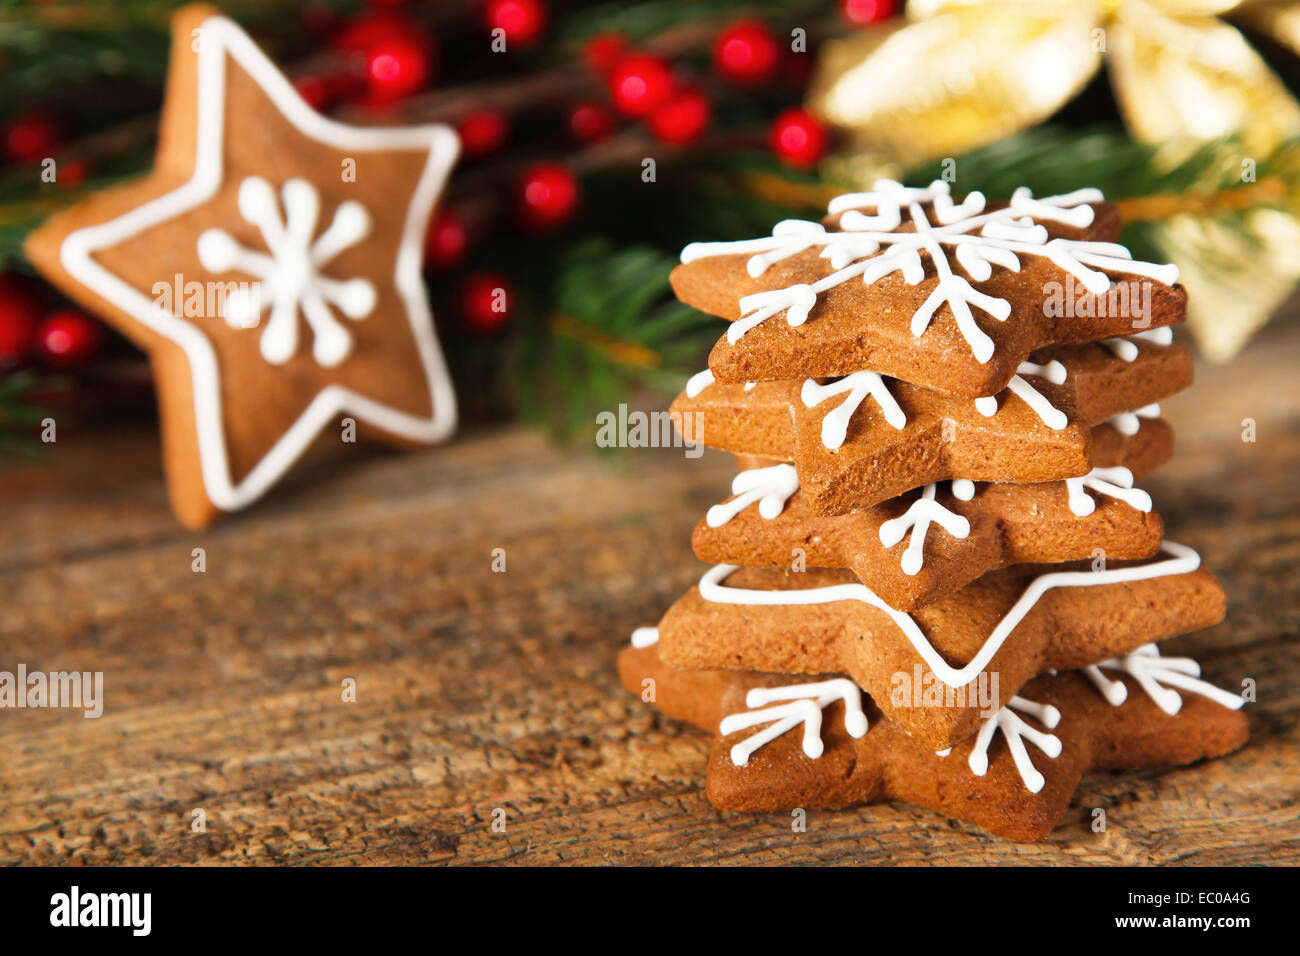 Christmas composition - gingerbread cookies on wooden table Stock Photo